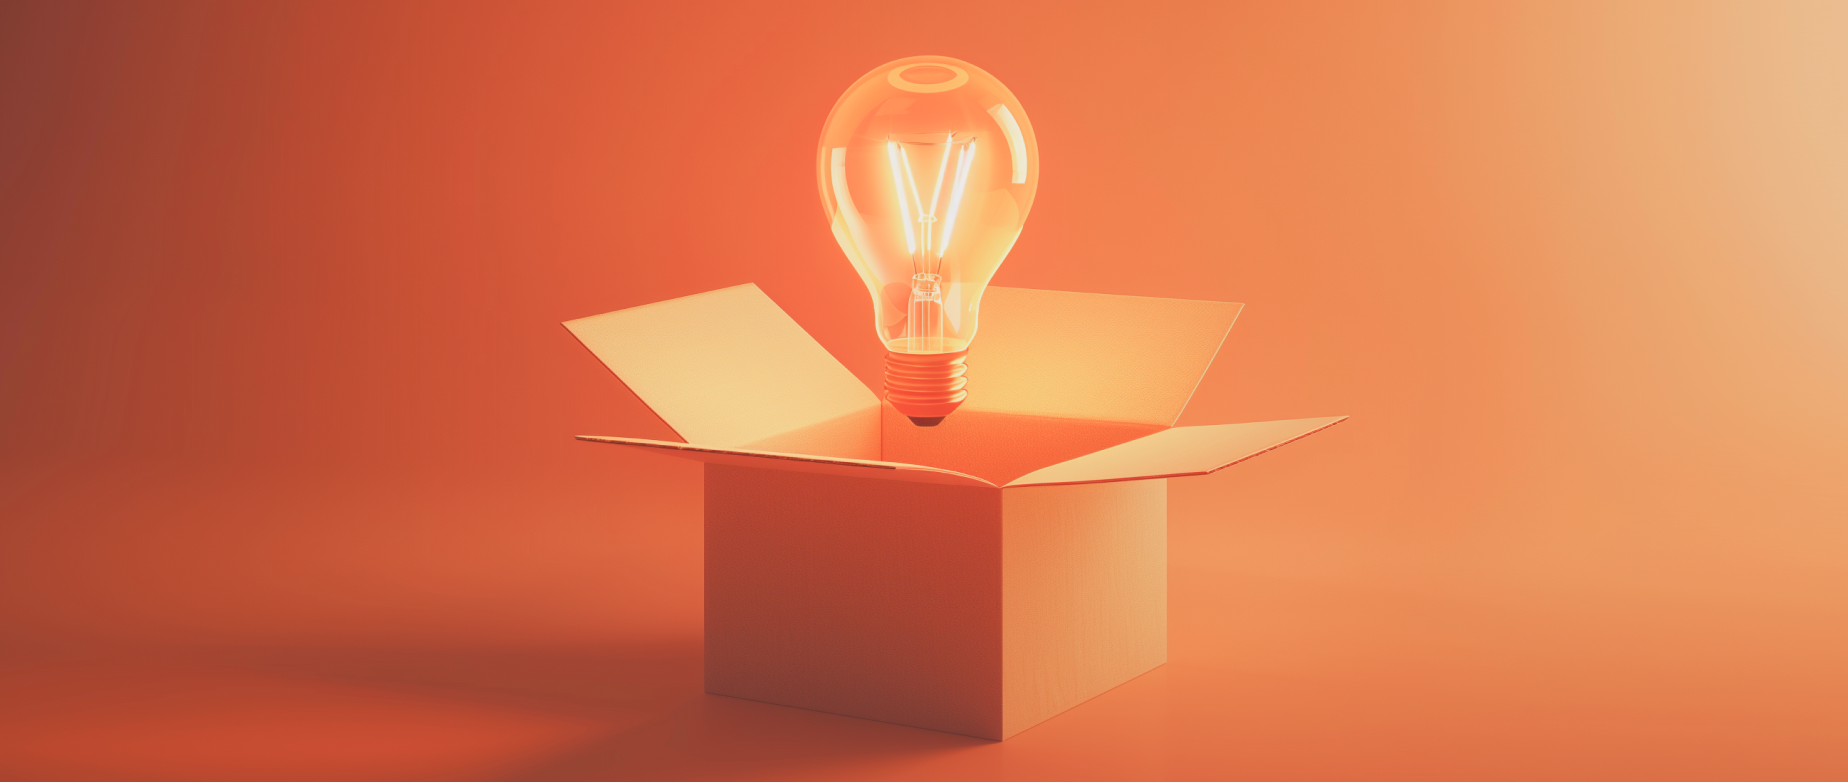 A lightbulb rises from a cardboard box representing dropshipping ideas